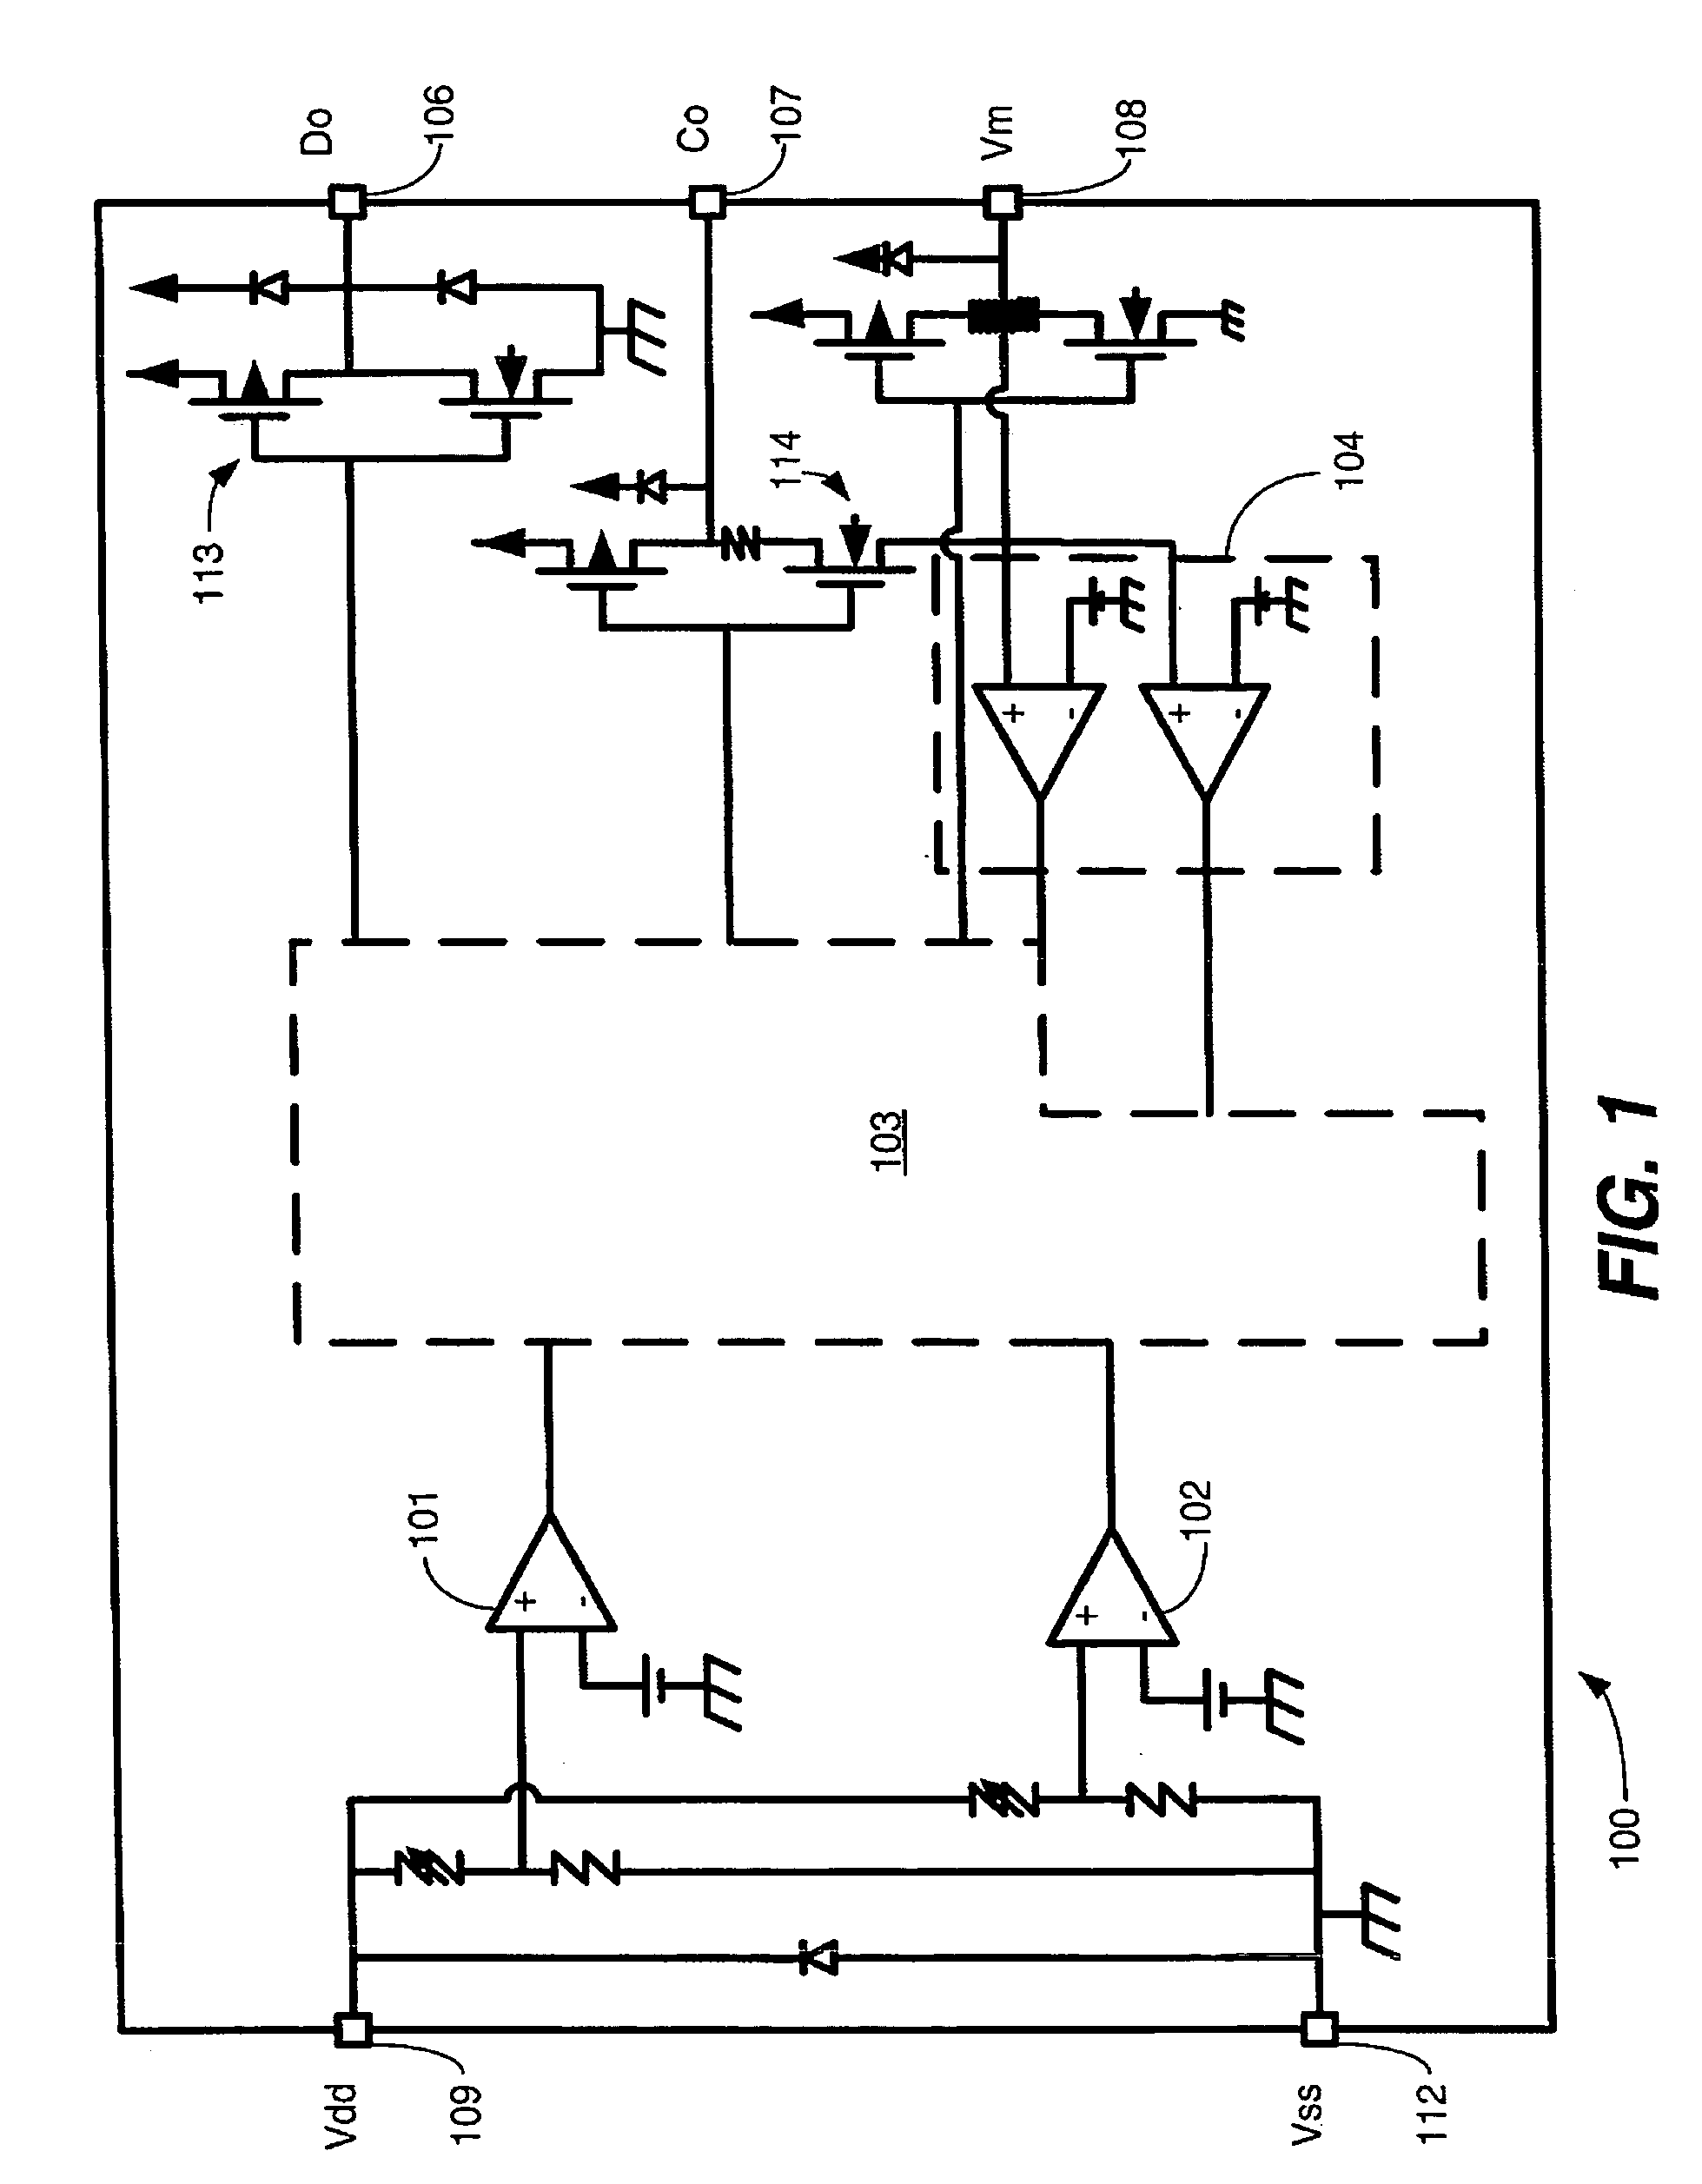 Battery fuel gauge using safety circuit